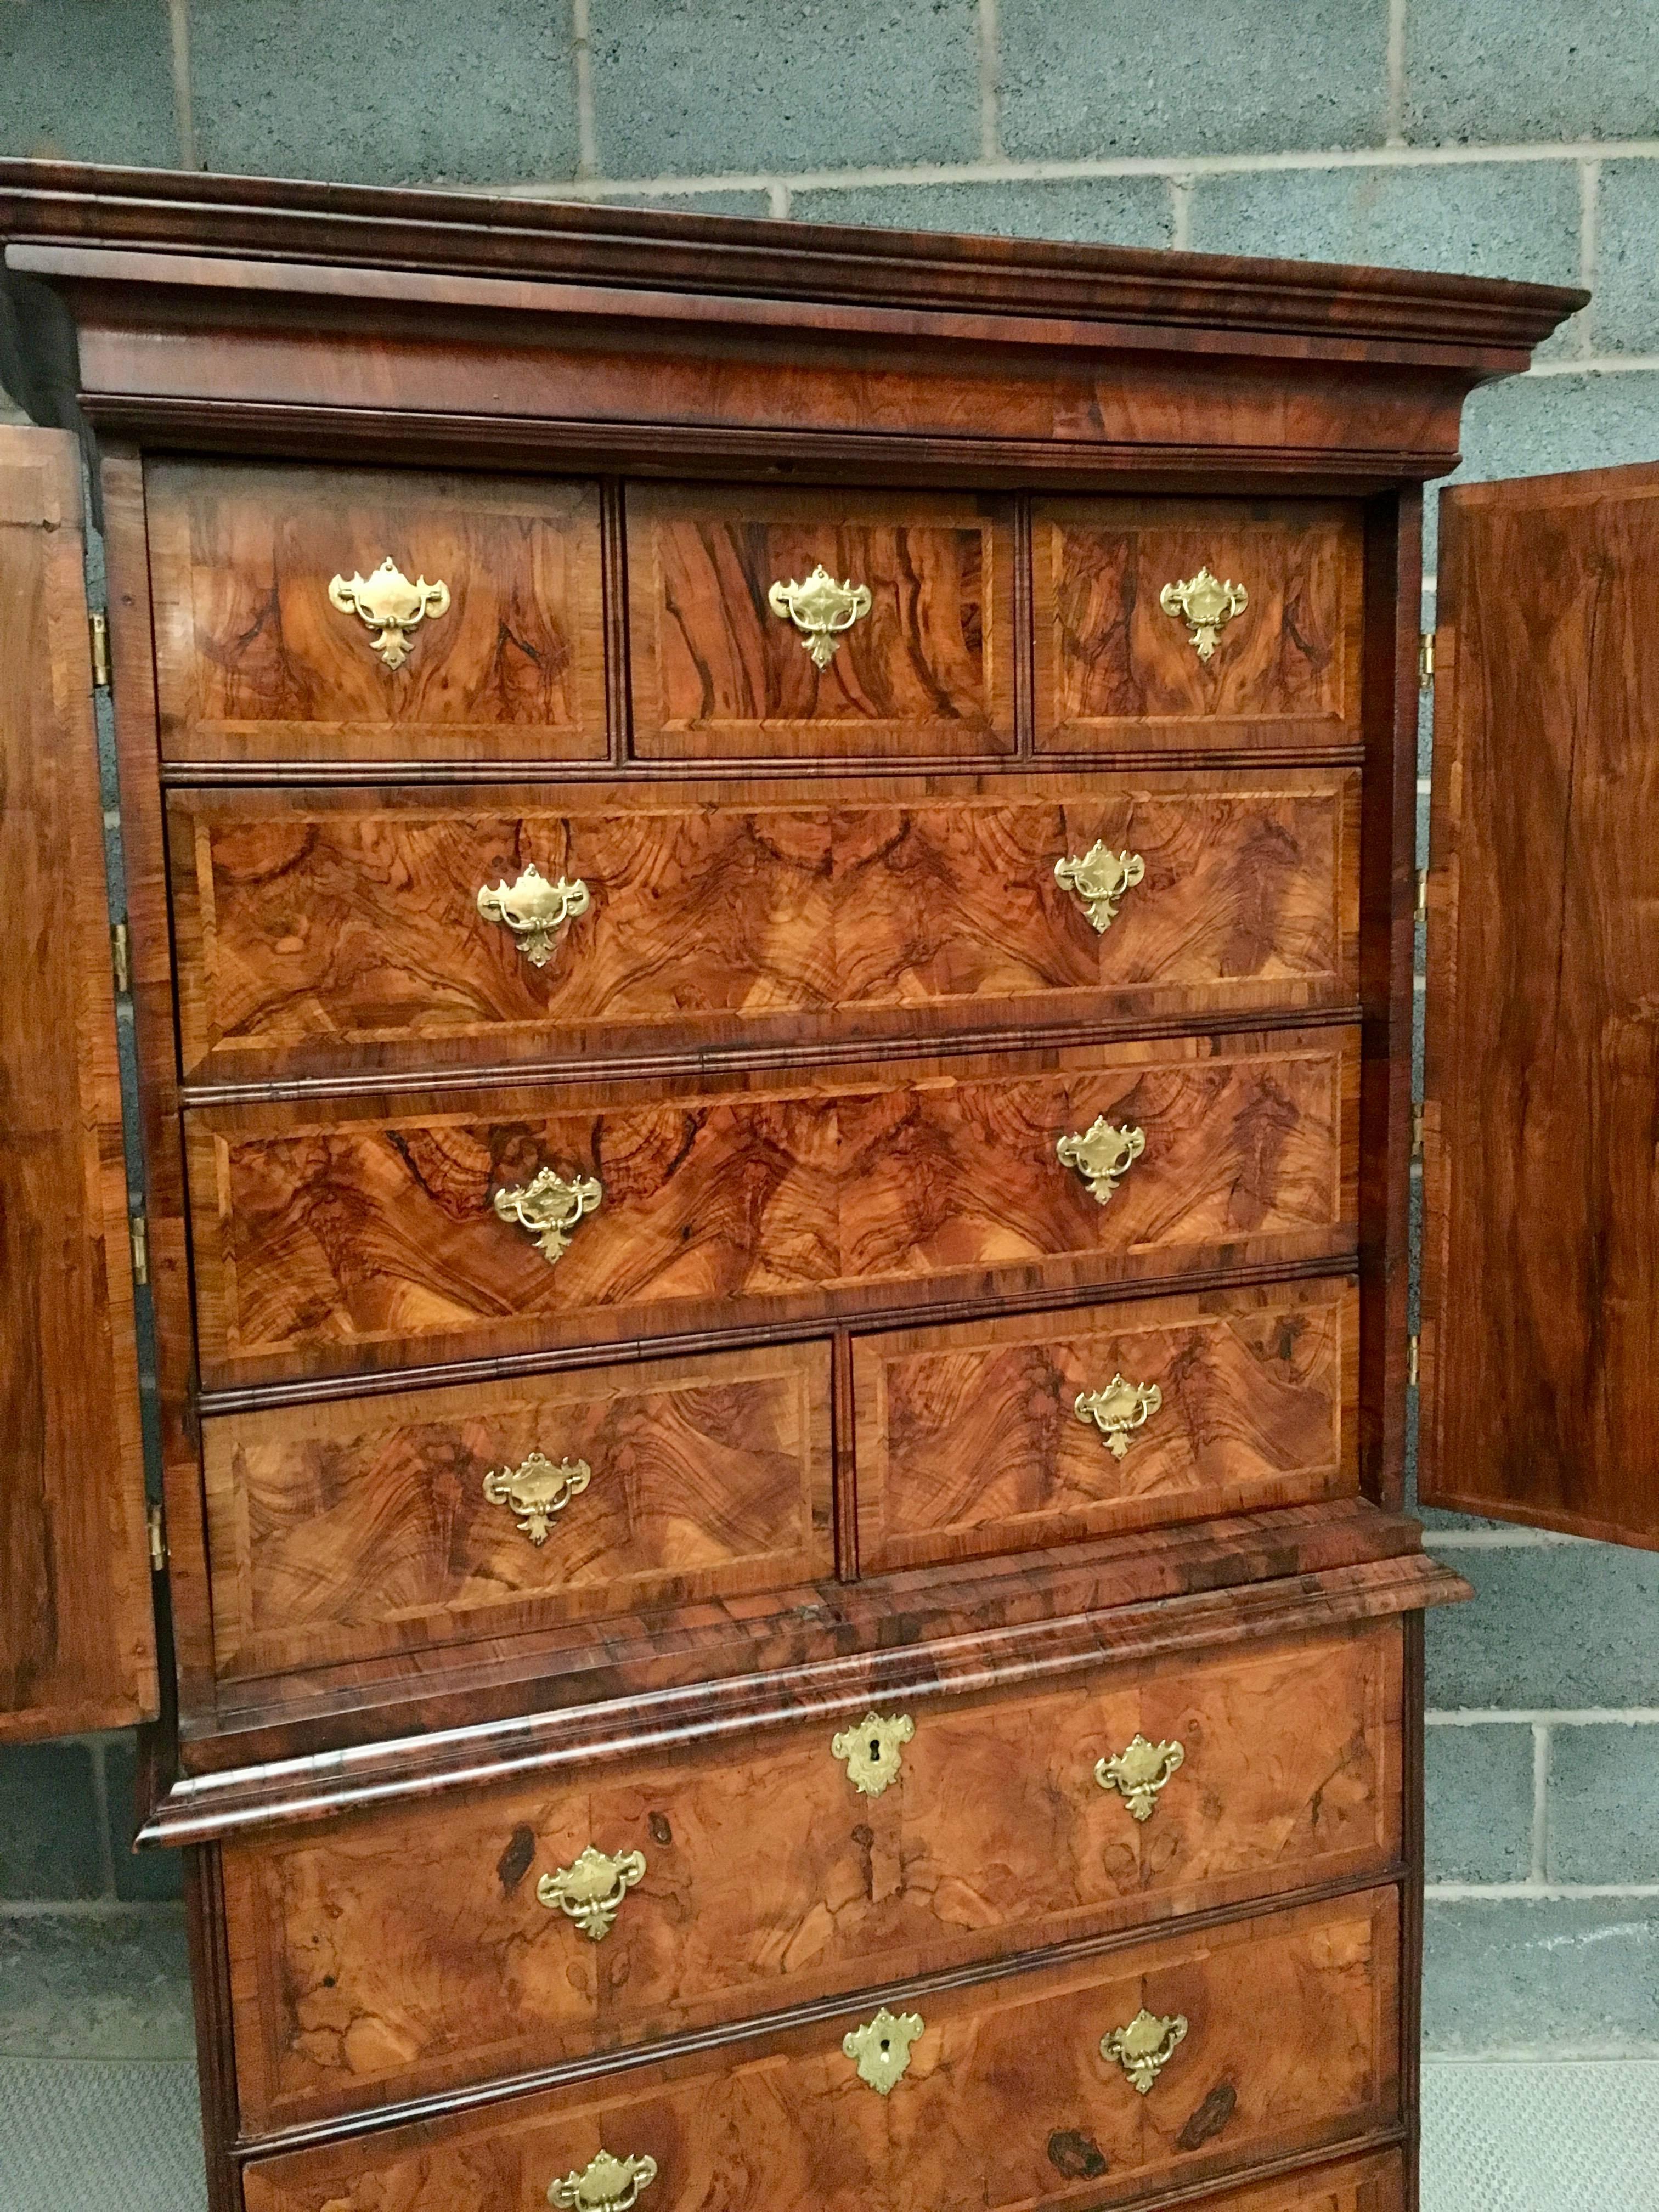 An early 18th century walnut fitted two-door cabinet on chest retaining the original handles and hinges. The metal work with engraved details.
Good mellow color and patination.